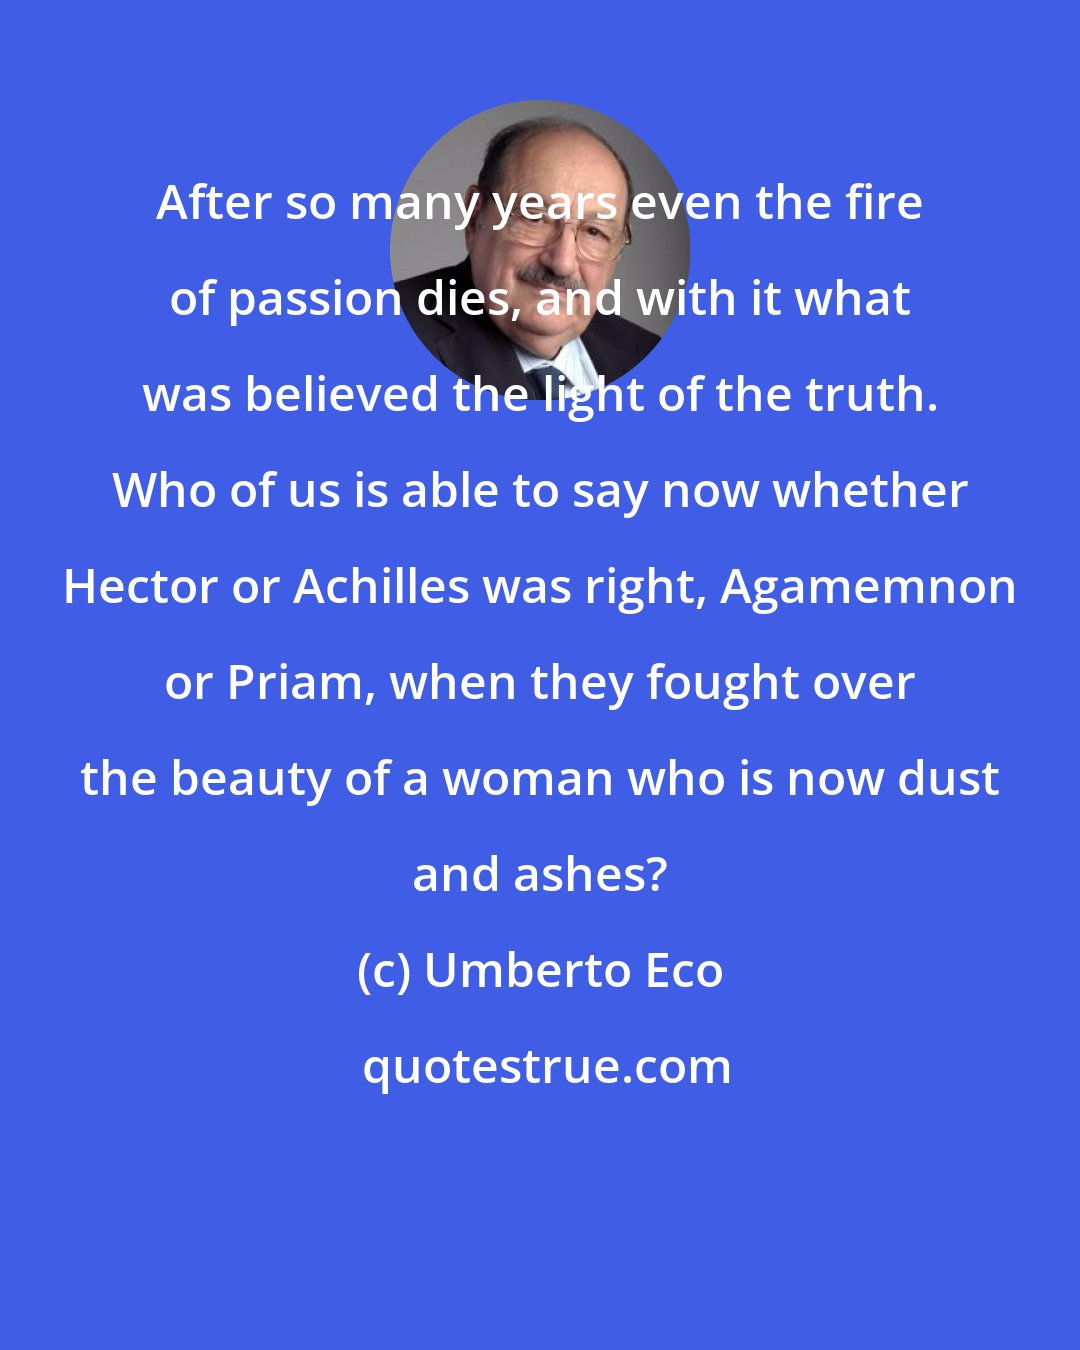 Umberto Eco: After so many years even the fire of passion dies, and with it what was believed the light of the truth. Who of us is able to say now whether Hector or Achilles was right, Agamemnon or Priam, when they fought over the beauty of a woman who is now dust and ashes?